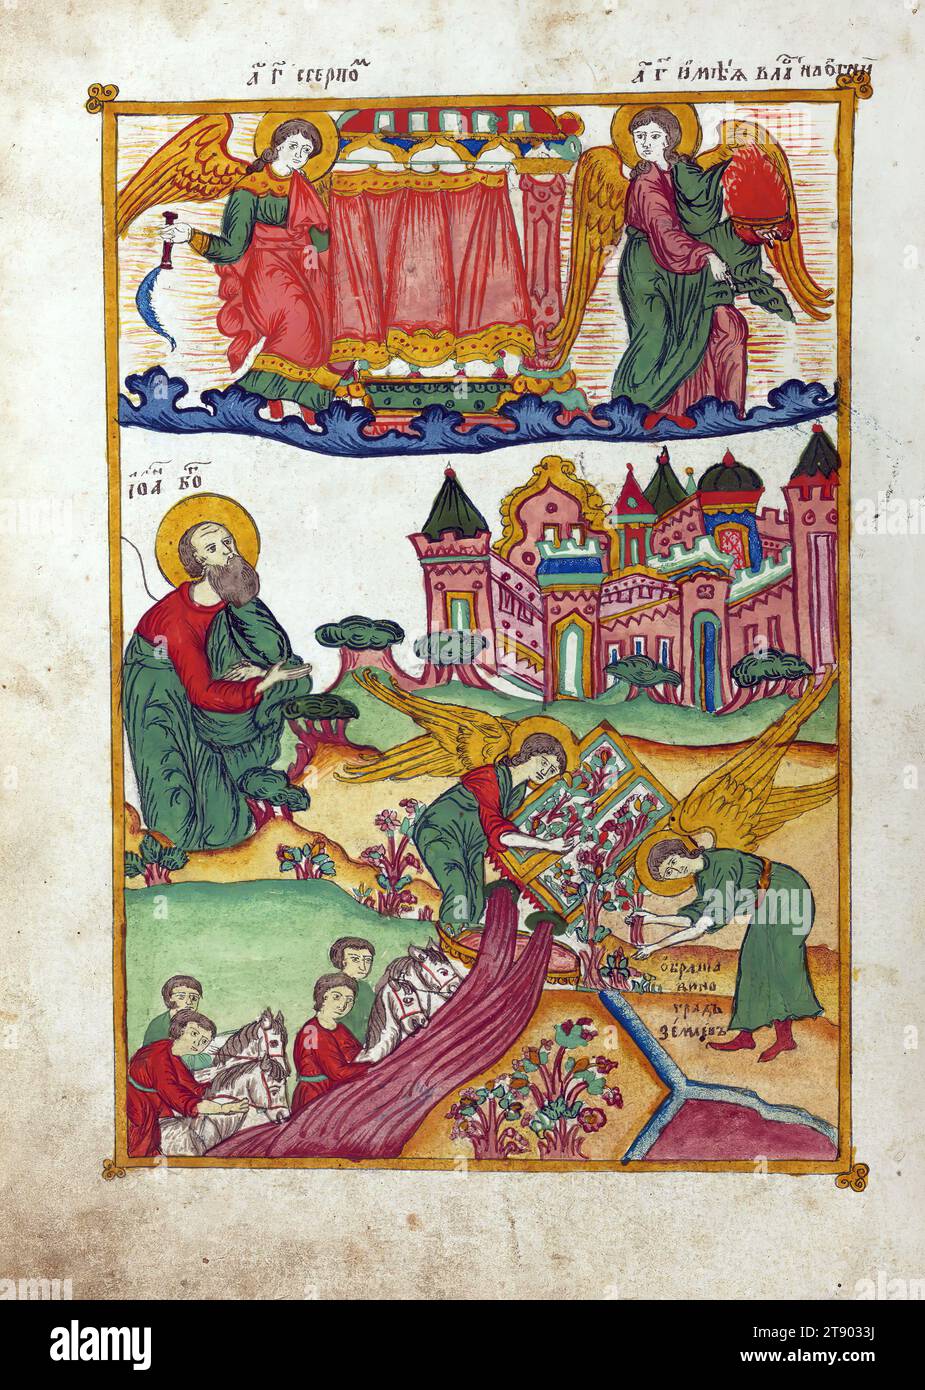 Apocalypse with Patristic commentary, The vinepress, This manuscript was made around 1800 by the 'Old Believers,' a group of Russian Christians who dissented from the Russian Orthodox Church and were subsequently persecuted and excommunicated. Because their books were often confiscated and they were forbidden to use printing presses, they continued to write important works such as this one by hand Stock Photo